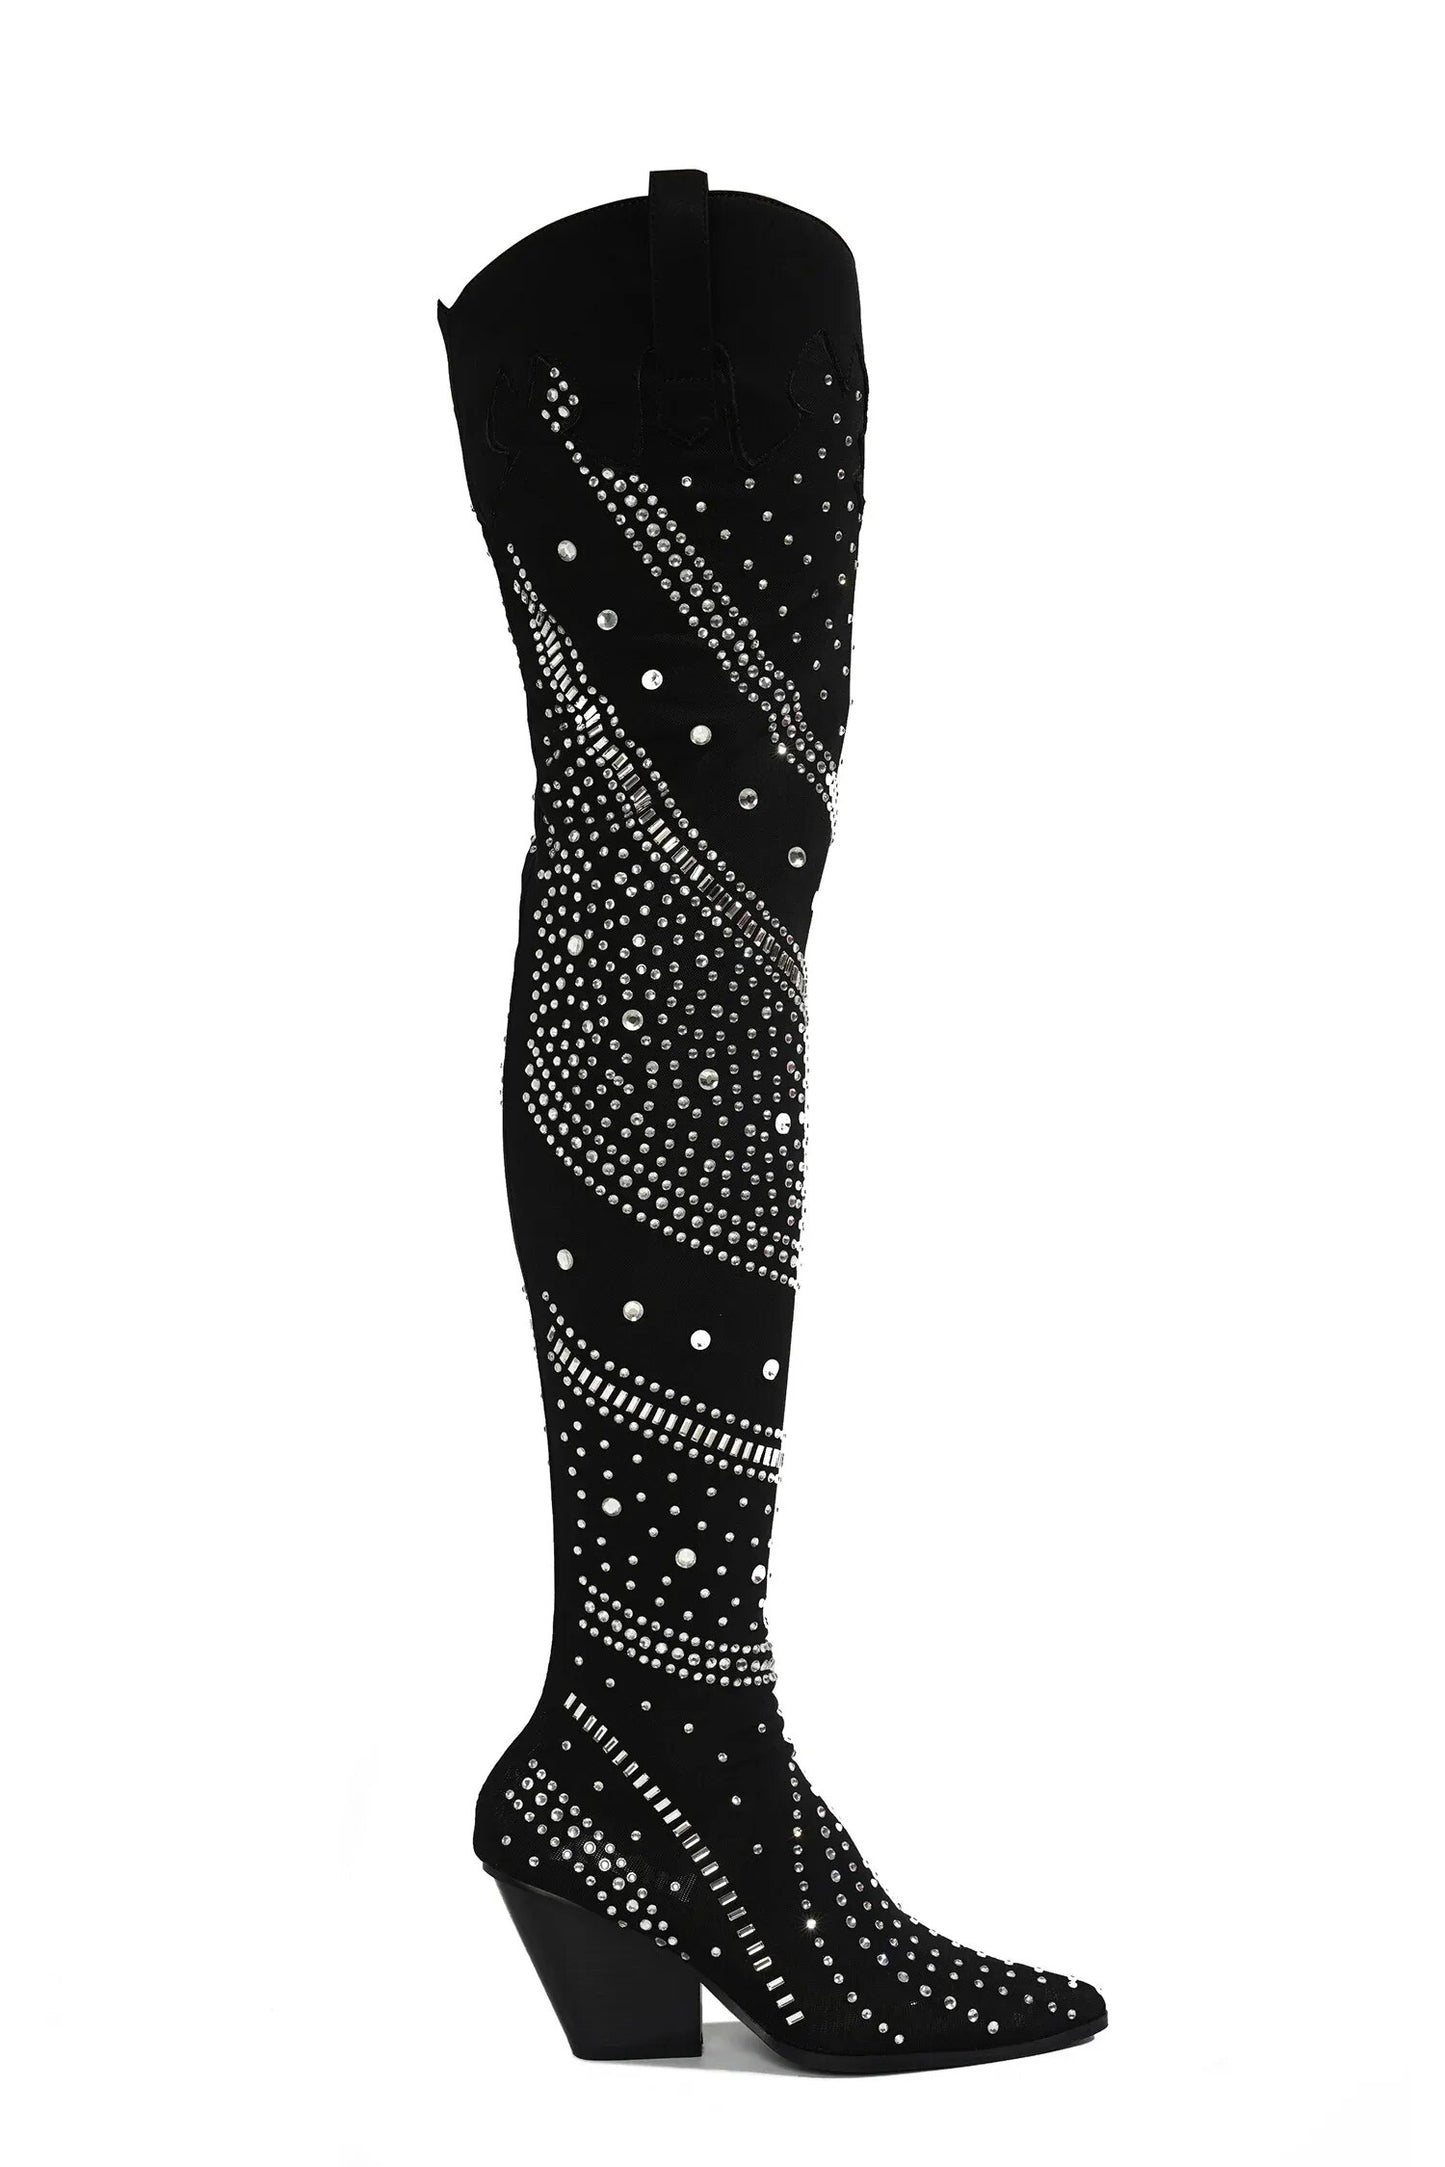 Luxury Crystal Bling Over-The-Knee Women's Boots